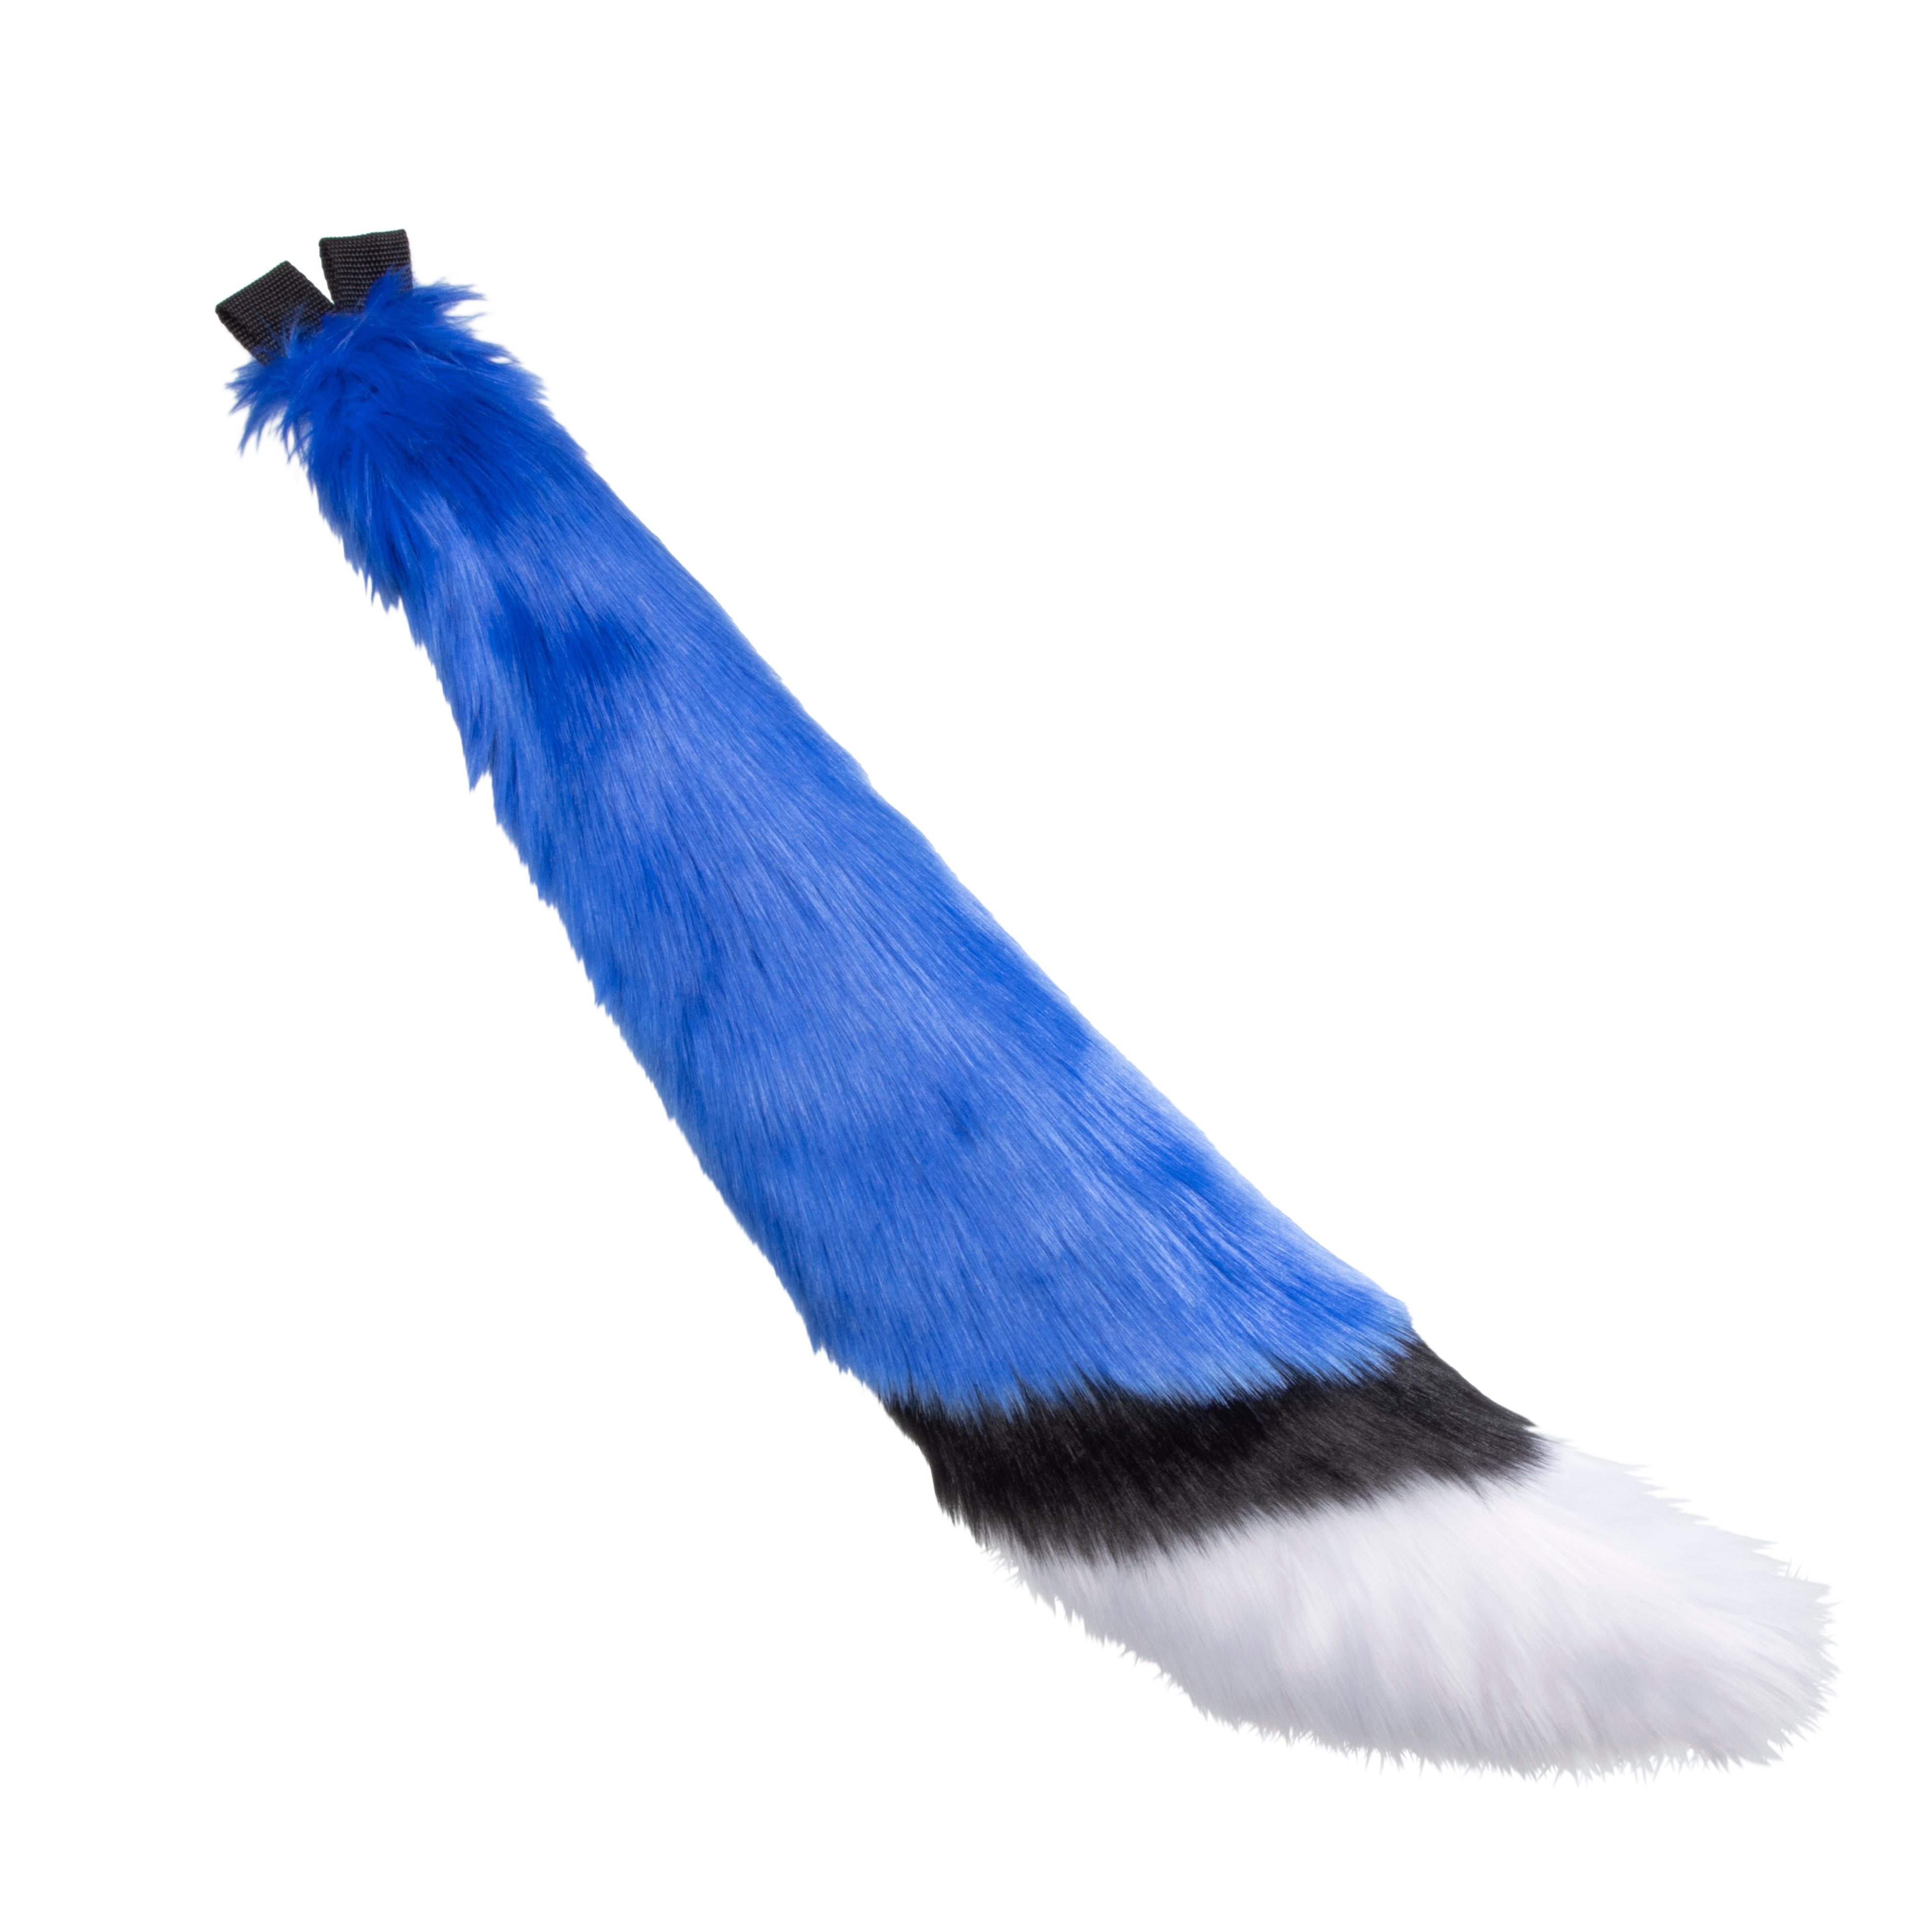 Pawstar Fox Tail + furry partial fursuit halloween costume cosplay accessory